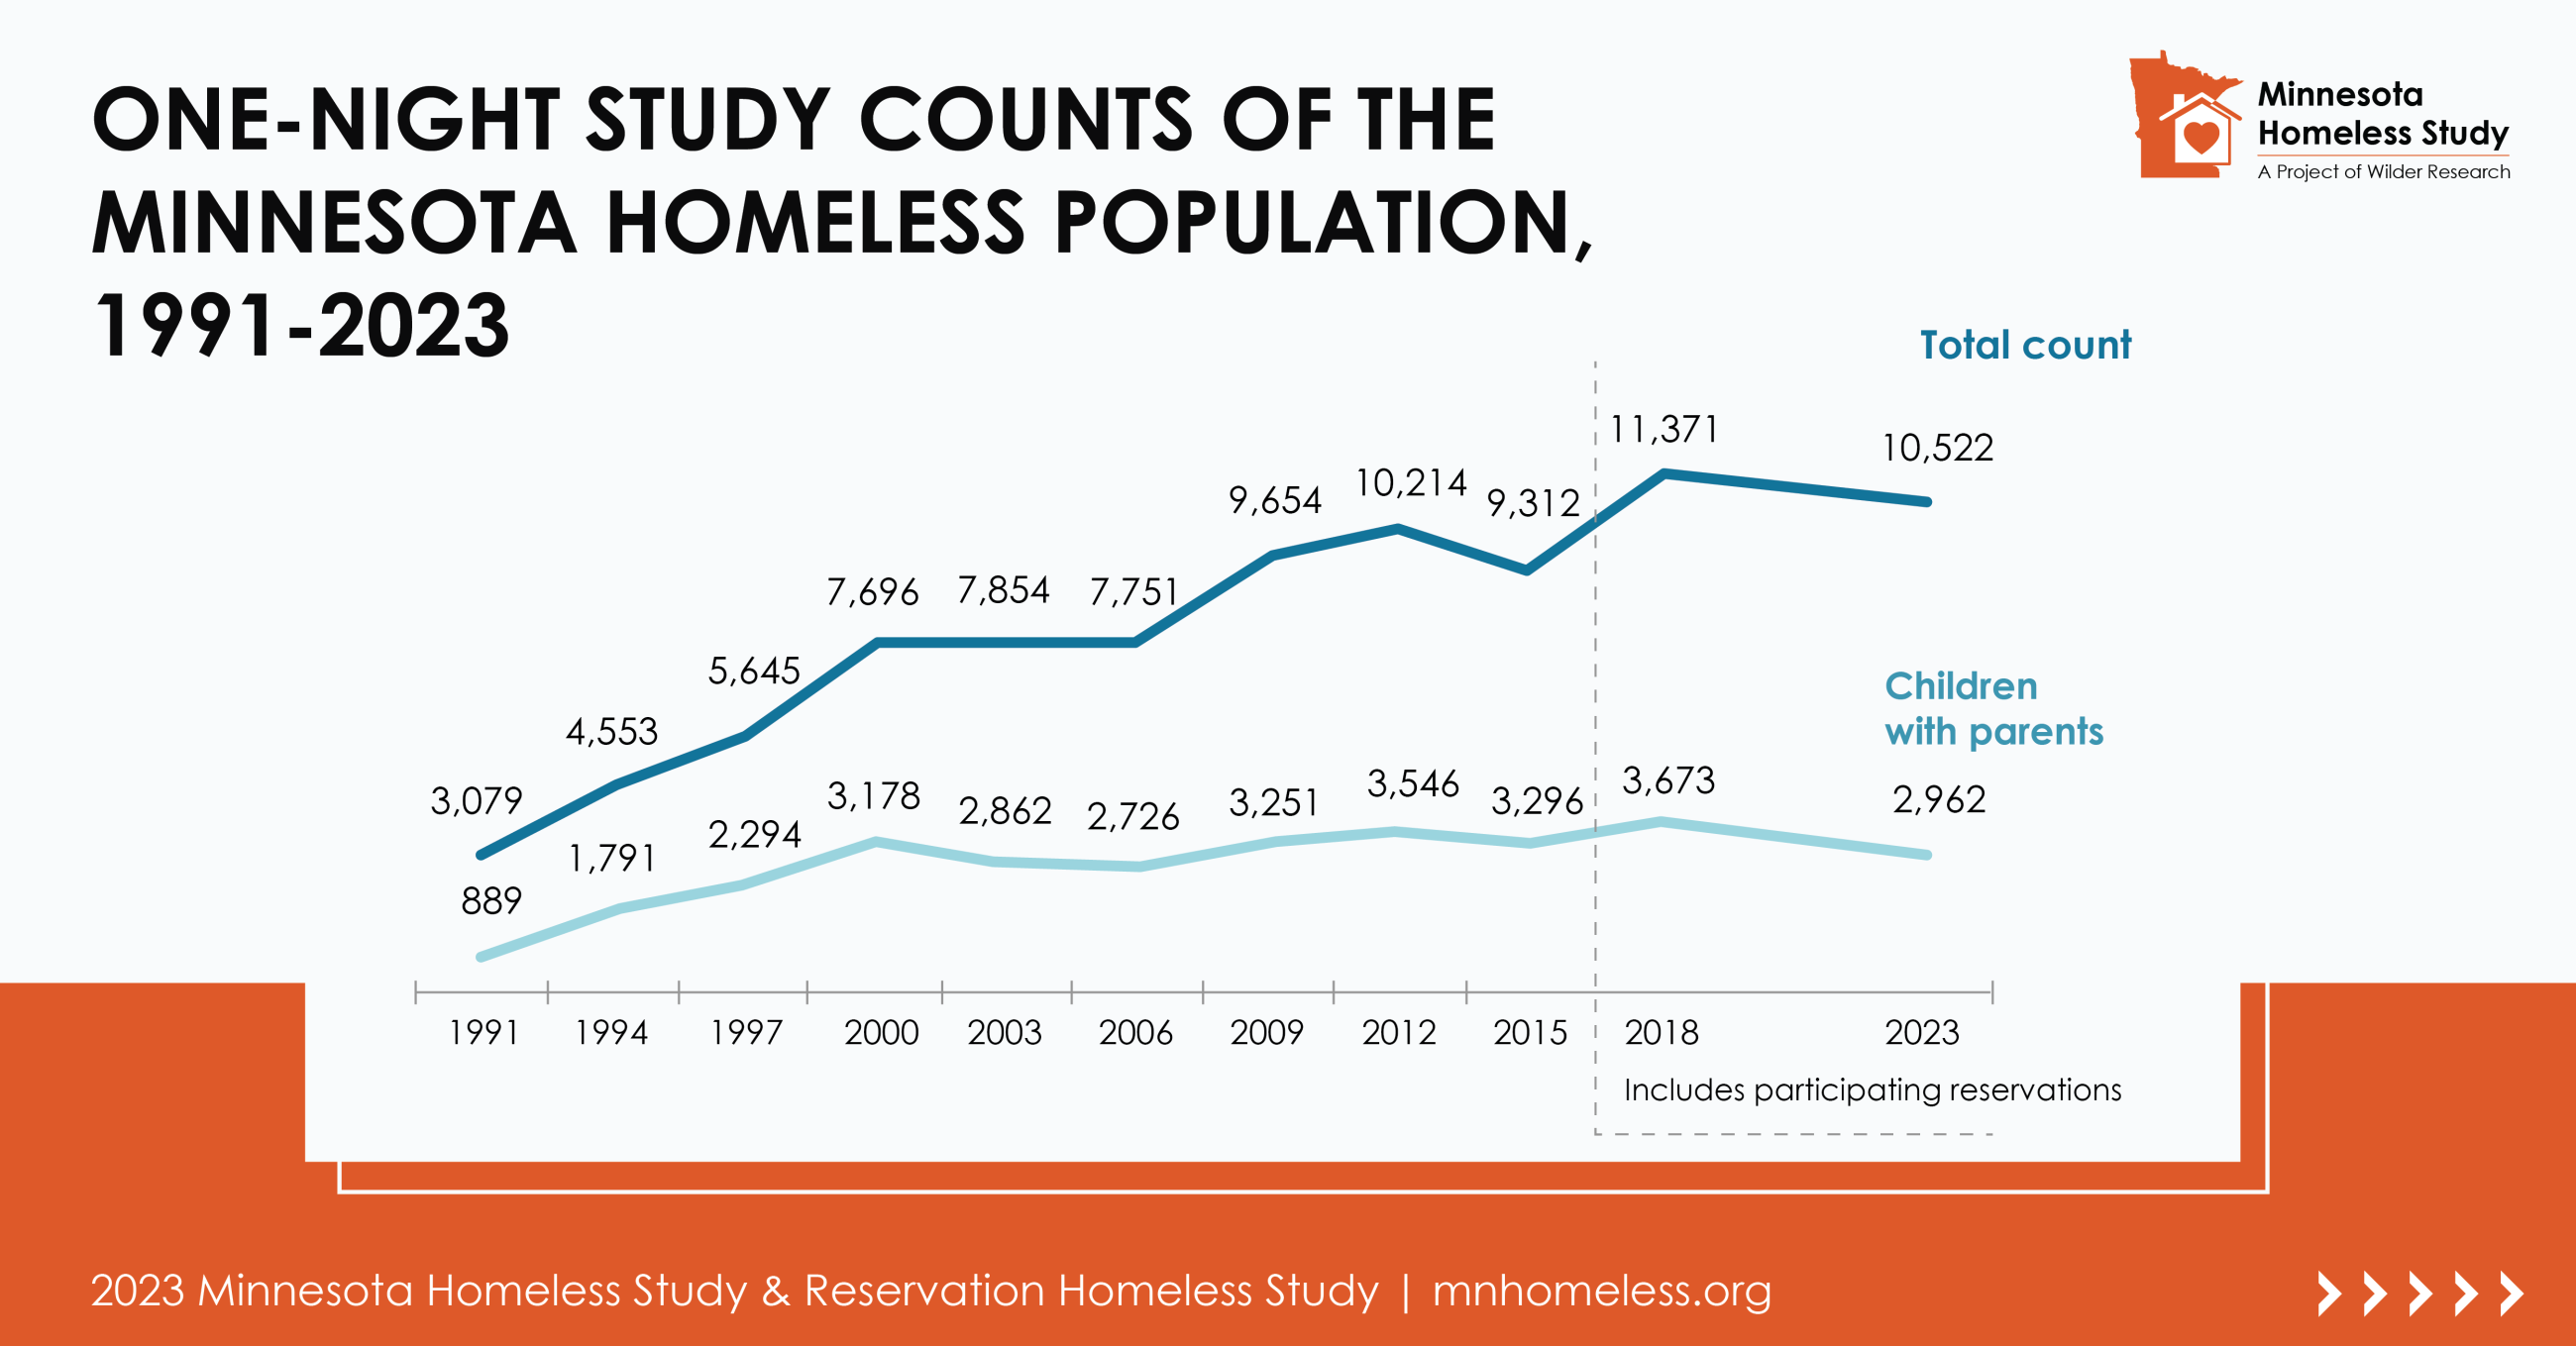 One-night study counts of the Minnesota homeless population from 1991-2003